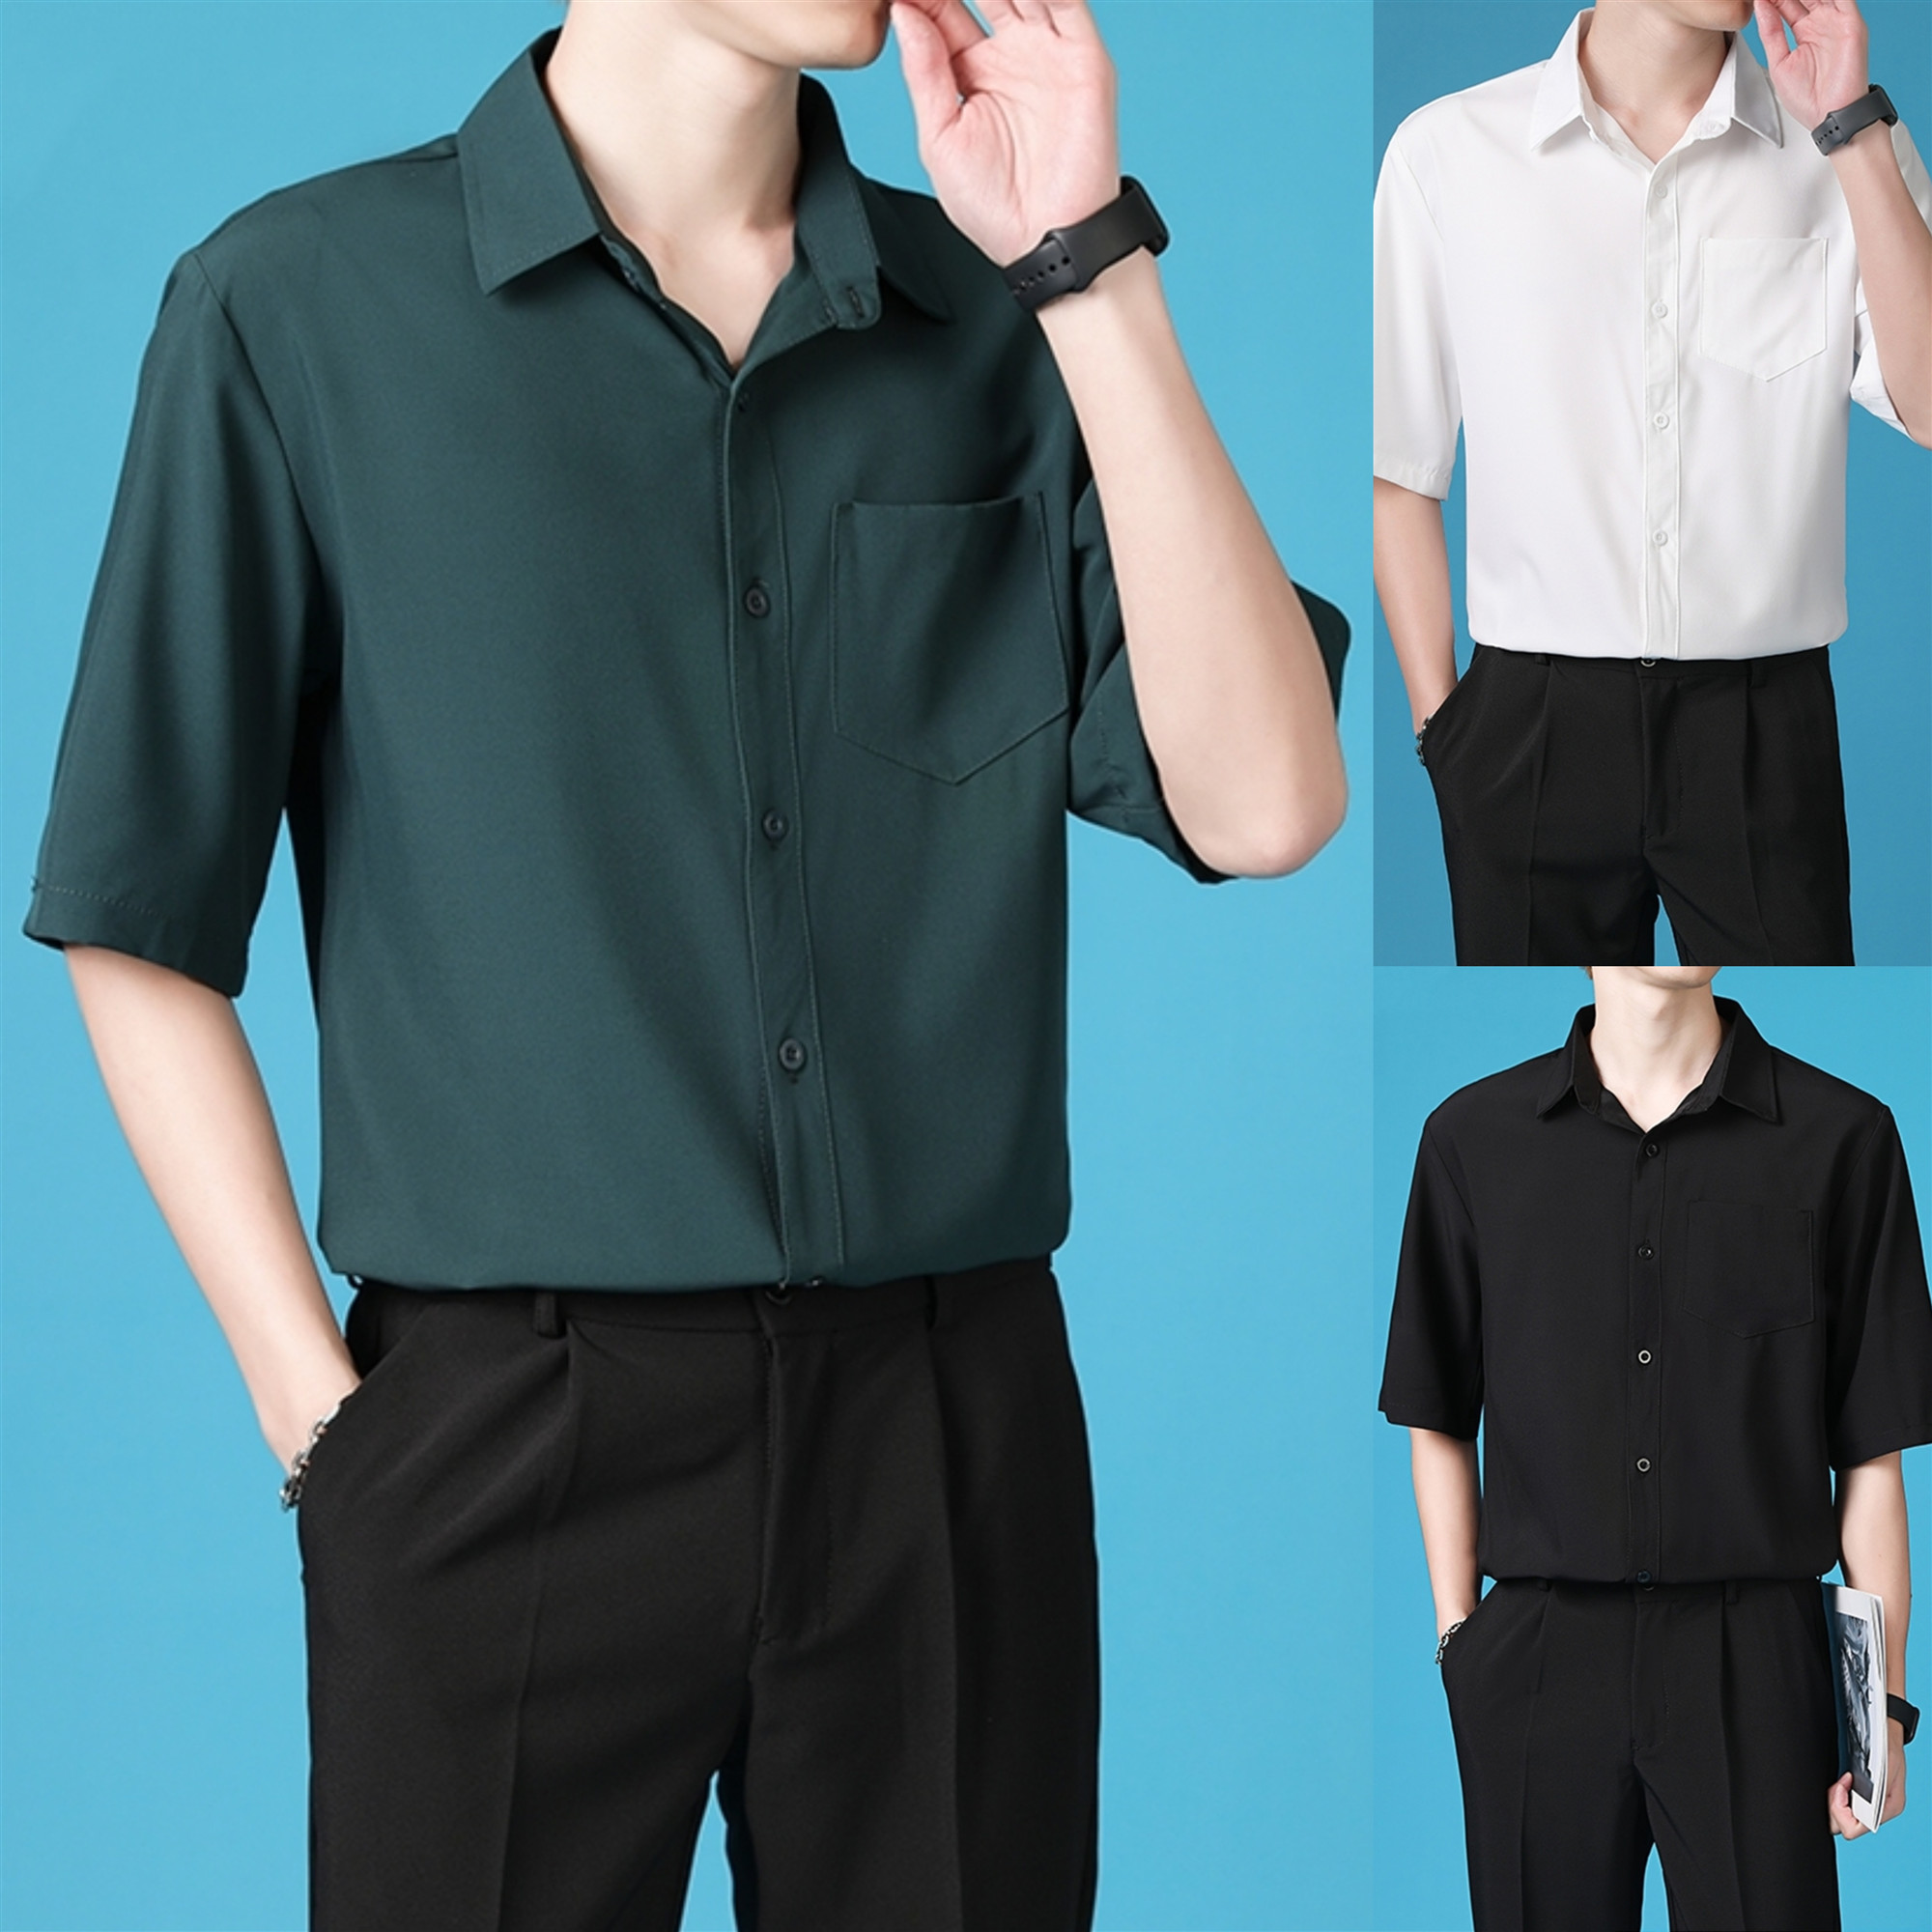 HUILISHI Men's Casual Polo Shirt - Suitable for Office Wear